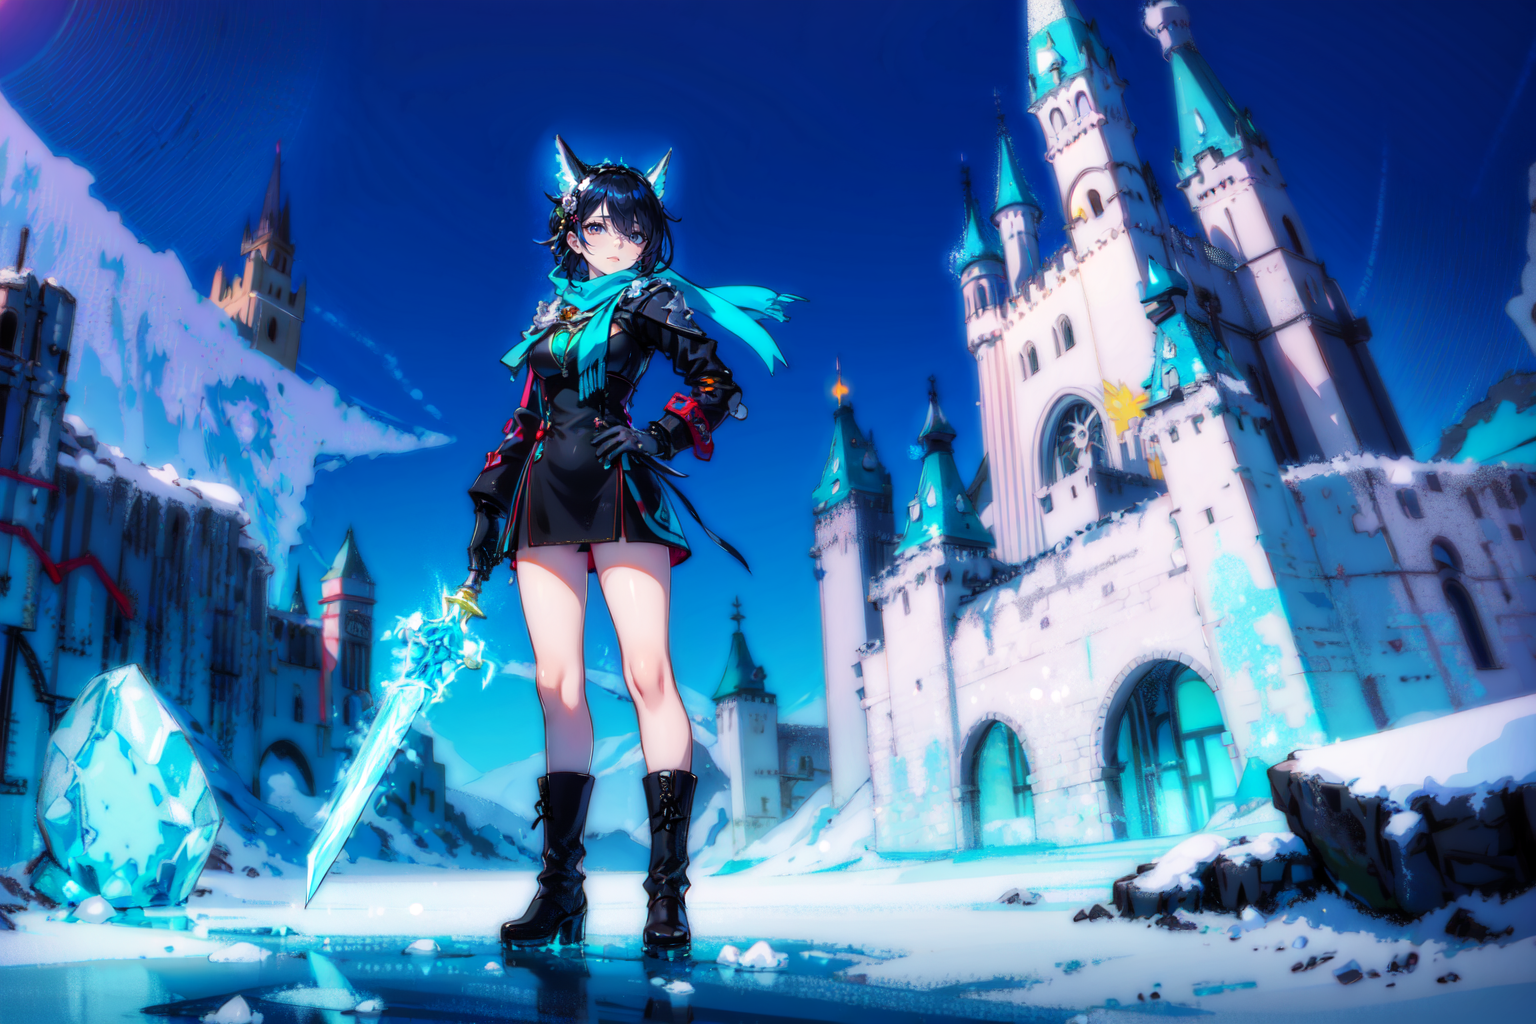 mechanical parts, head gear
(A woman standing before a castle made of ice. The environment is cold and full of ice. The sky is dark.:1.2)

(She is holding a teal, frozen dagger.:1.2)
The woman has long black hair. Front hair covering her right eye.
She has blue scarf. She has blue boots that covers up to her knees. She has black gloves.
Her thighs are exposed.